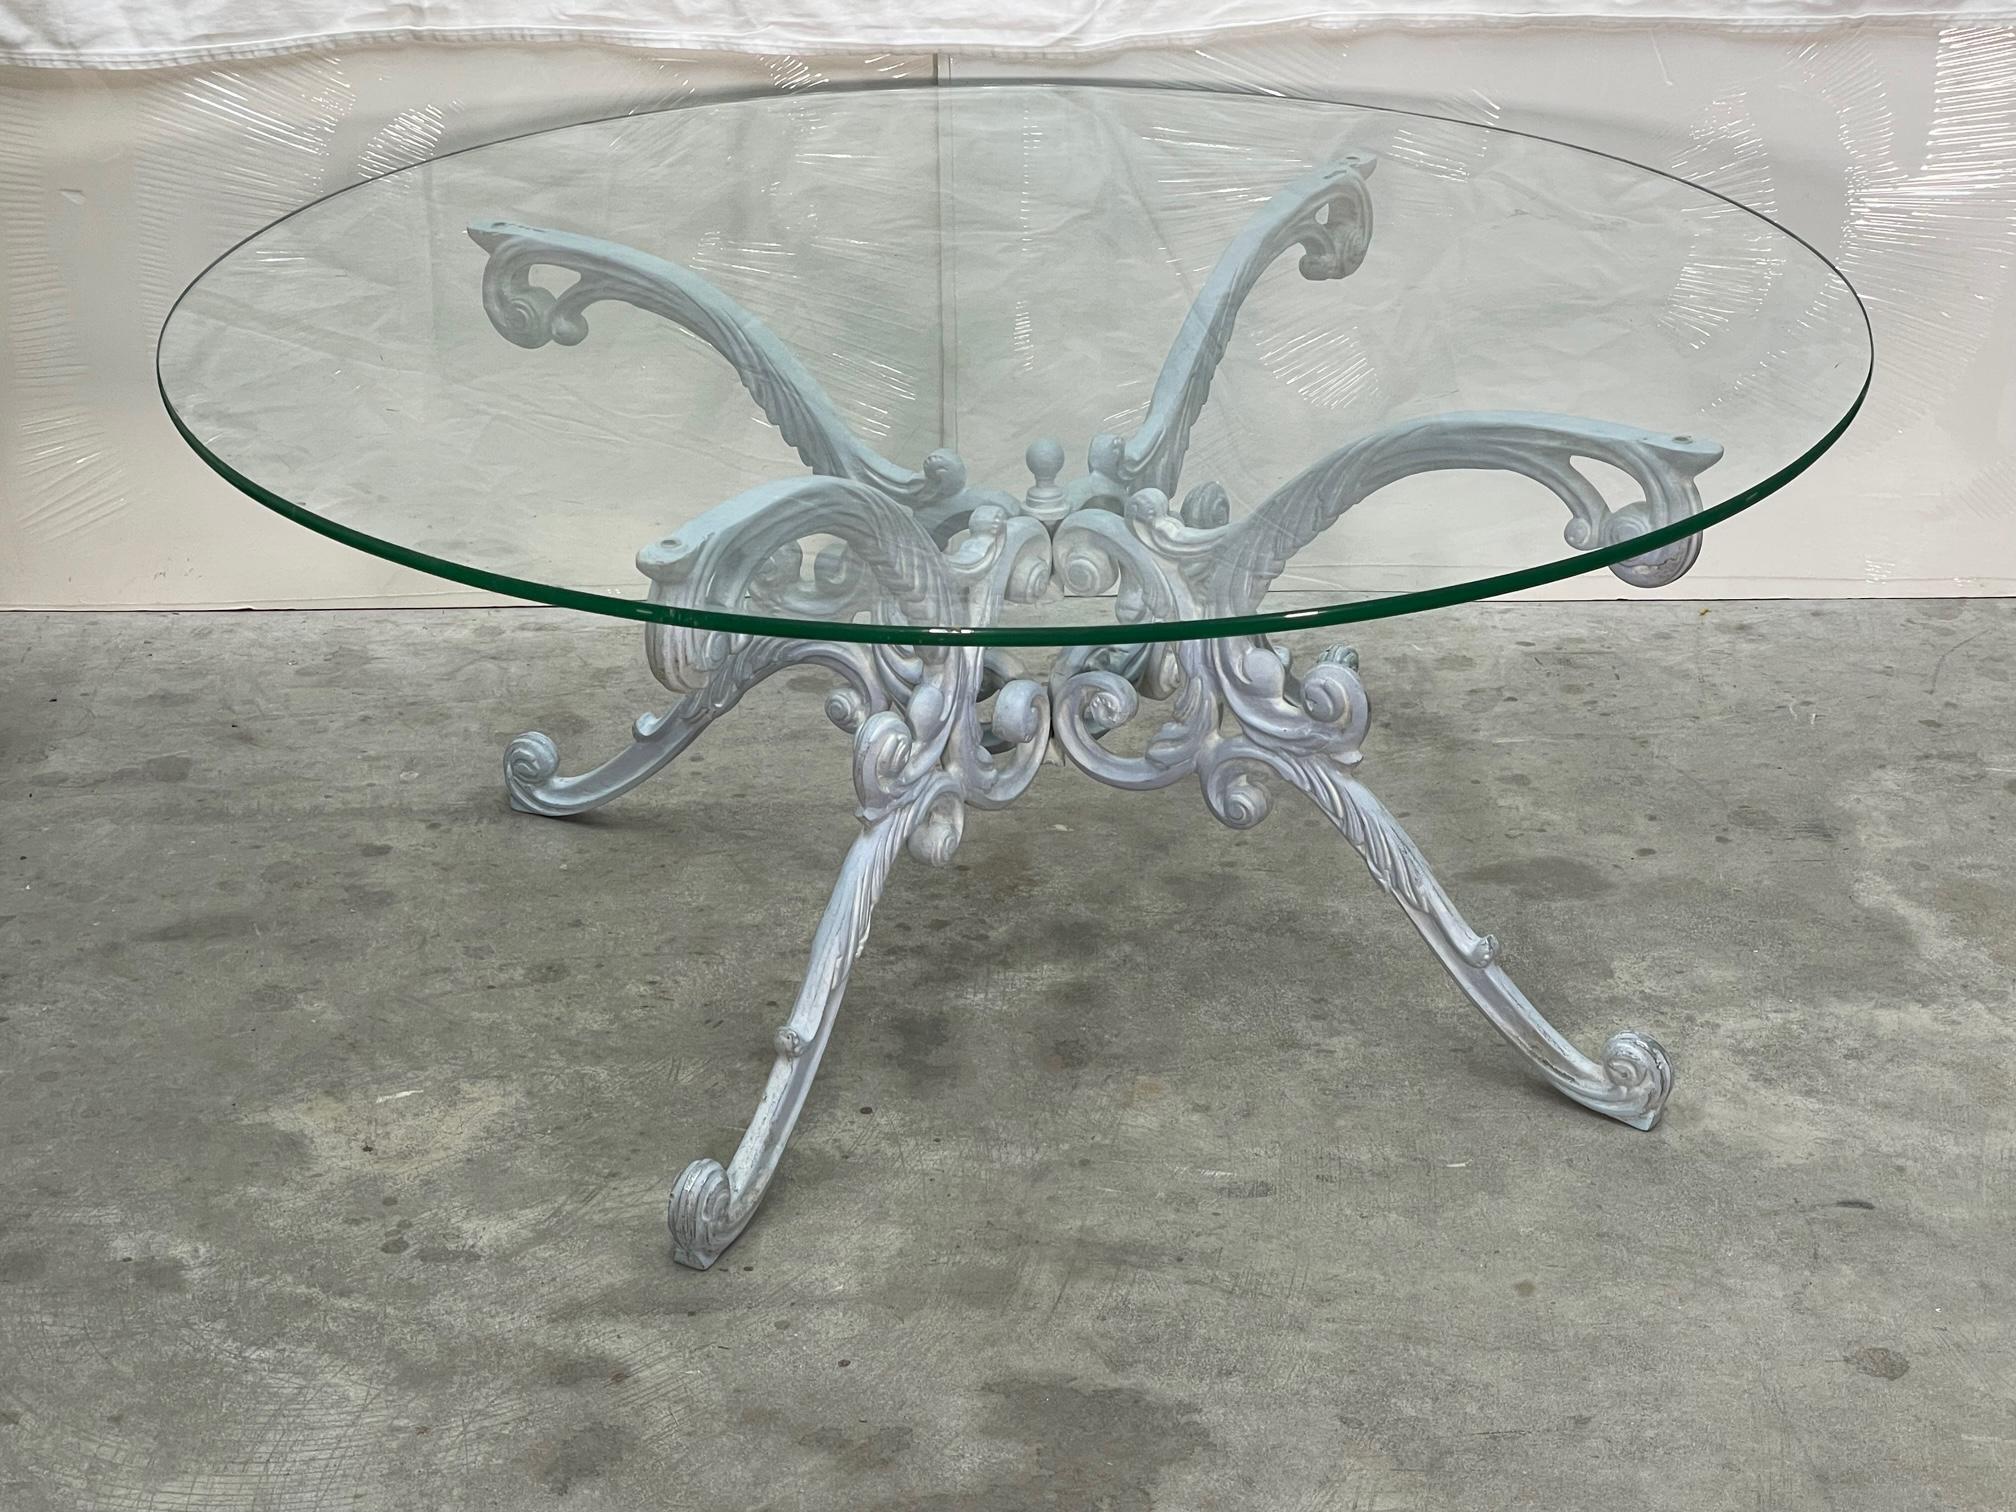 Cast iron coffee or cocktail patio table by Woodard features an ornate base and a 42